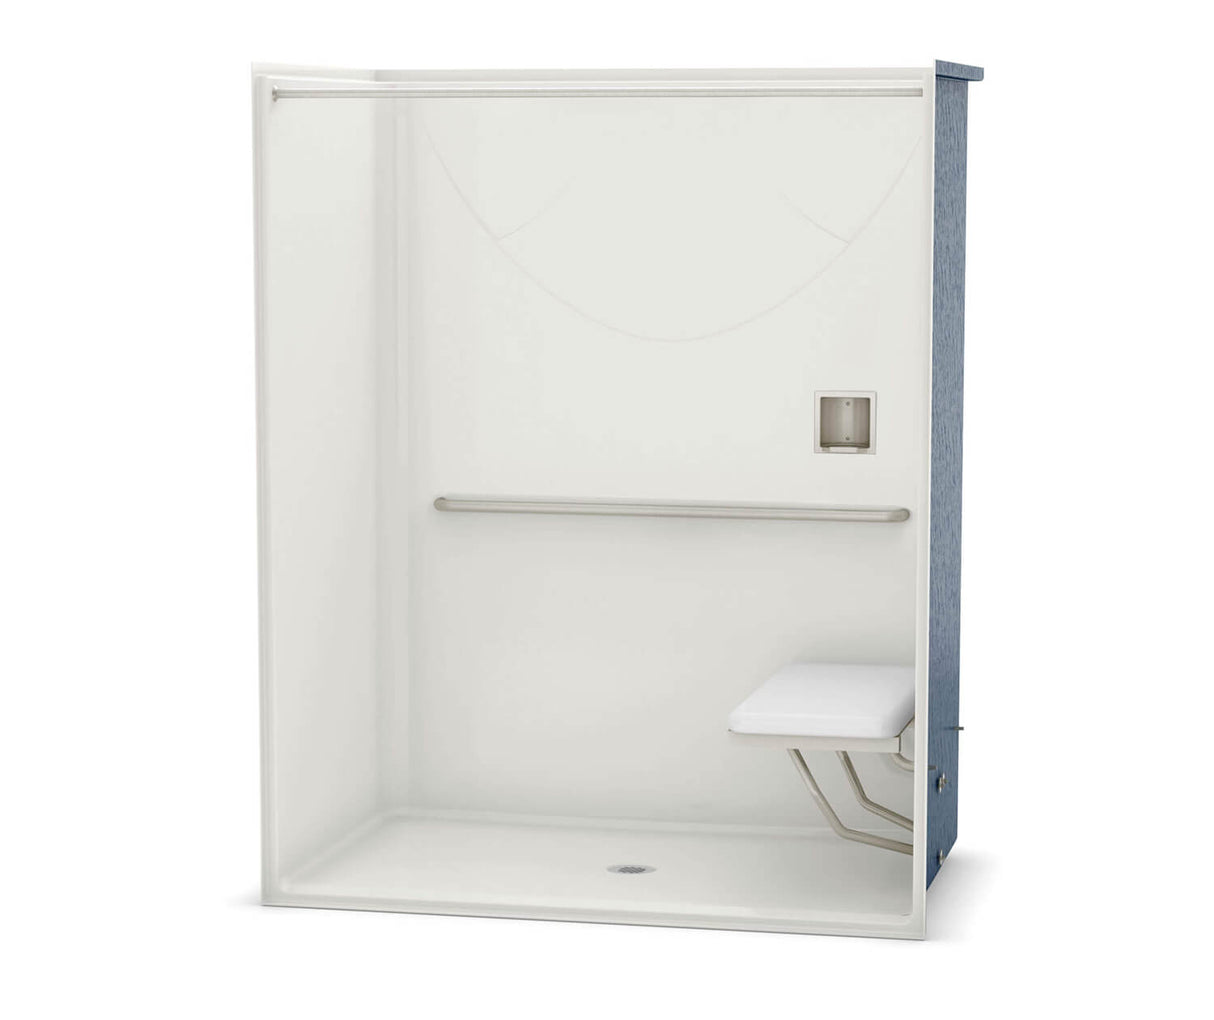 Aker OPS-6036 AcrylX Alcove Center Drain One-Piece Shower in White - MASS Grab Bar and Seat